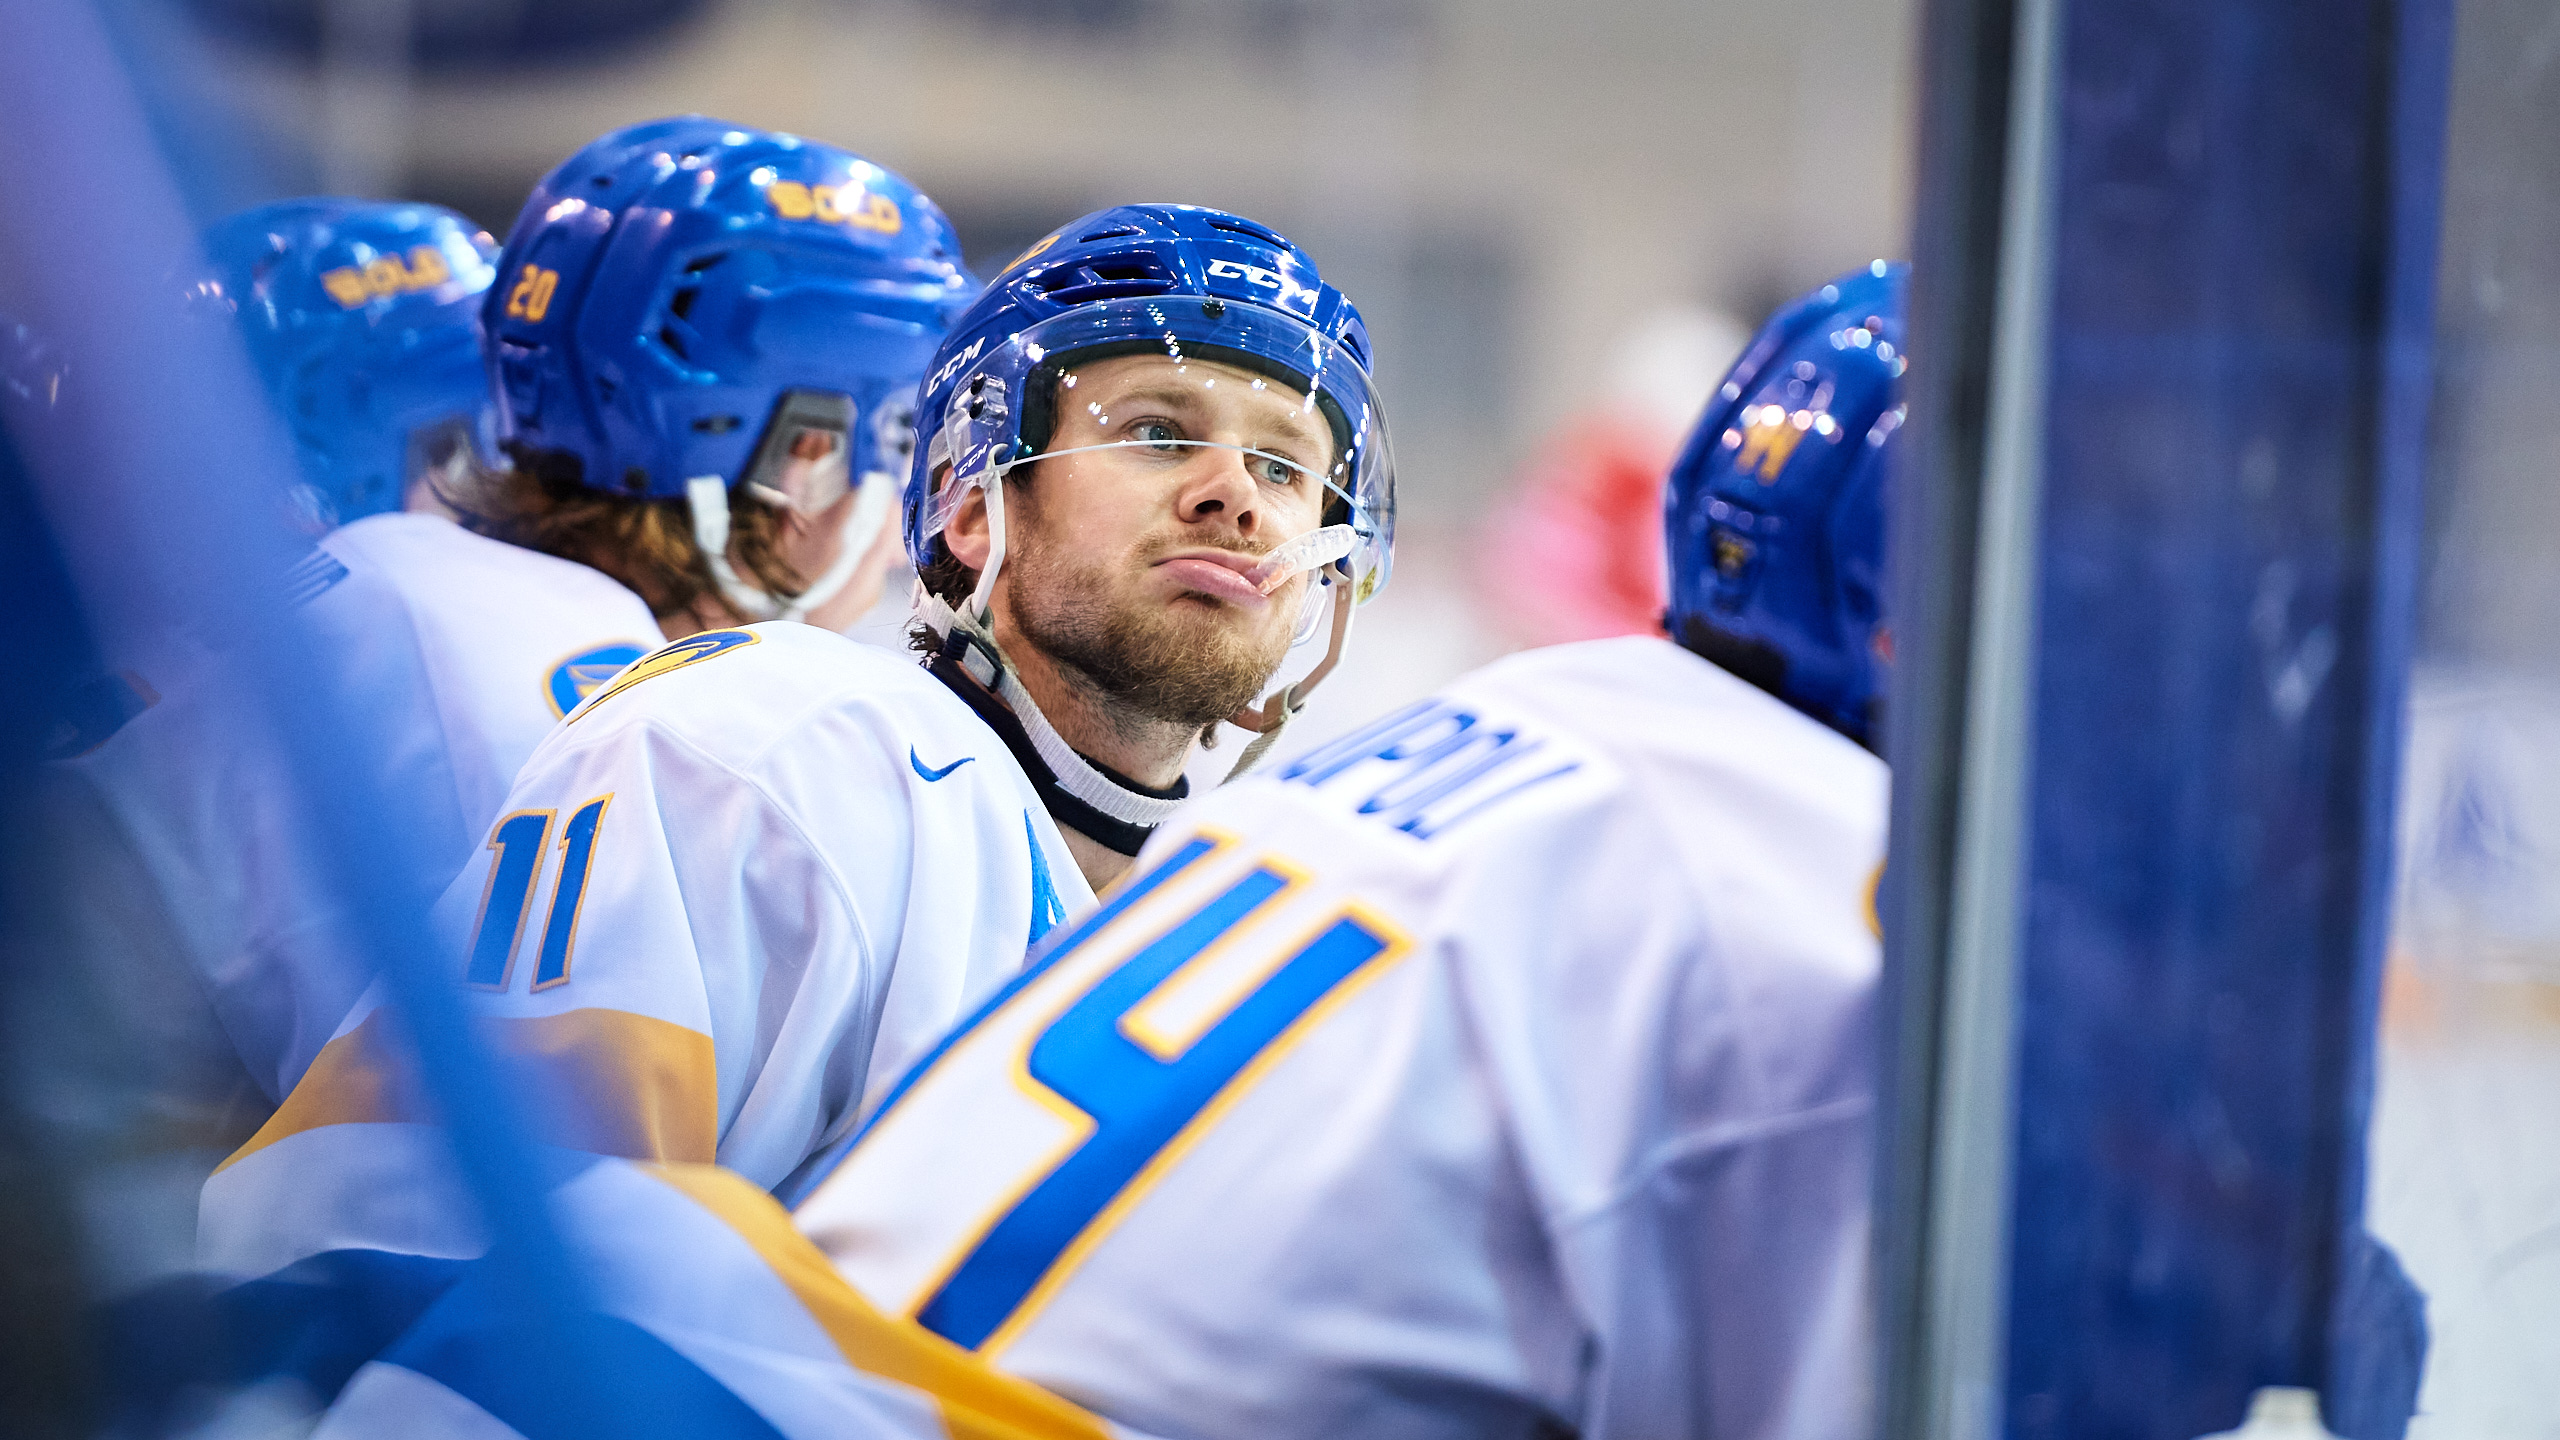 TMU men's hockey player Ryan Wells stares at the ice while on the bench with his mouthguard hanging out of his mouth